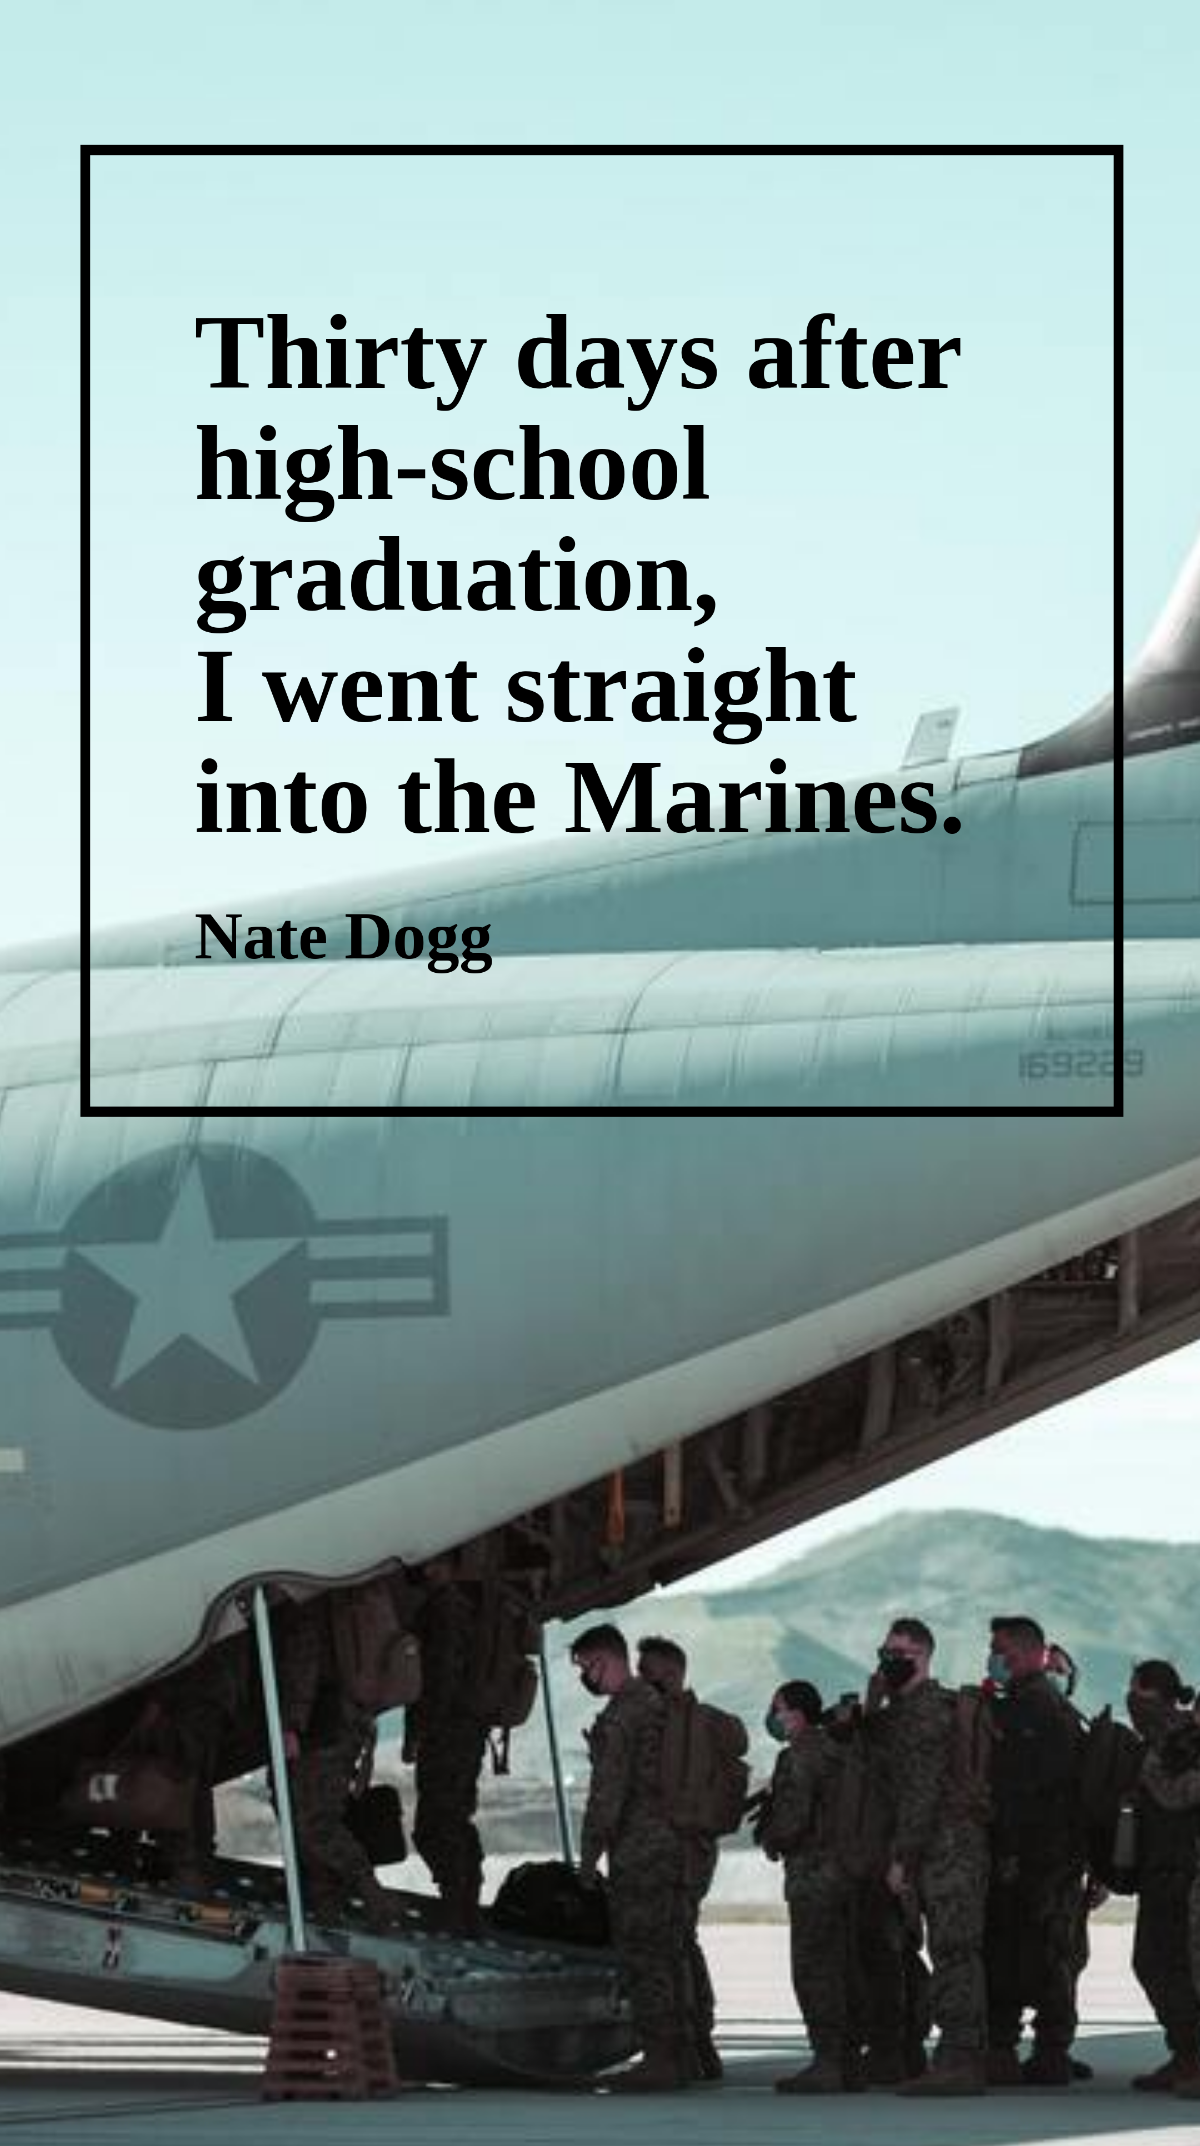 Nate Dogg - Thirty days after high-school graduation, I went straight into the Marines.